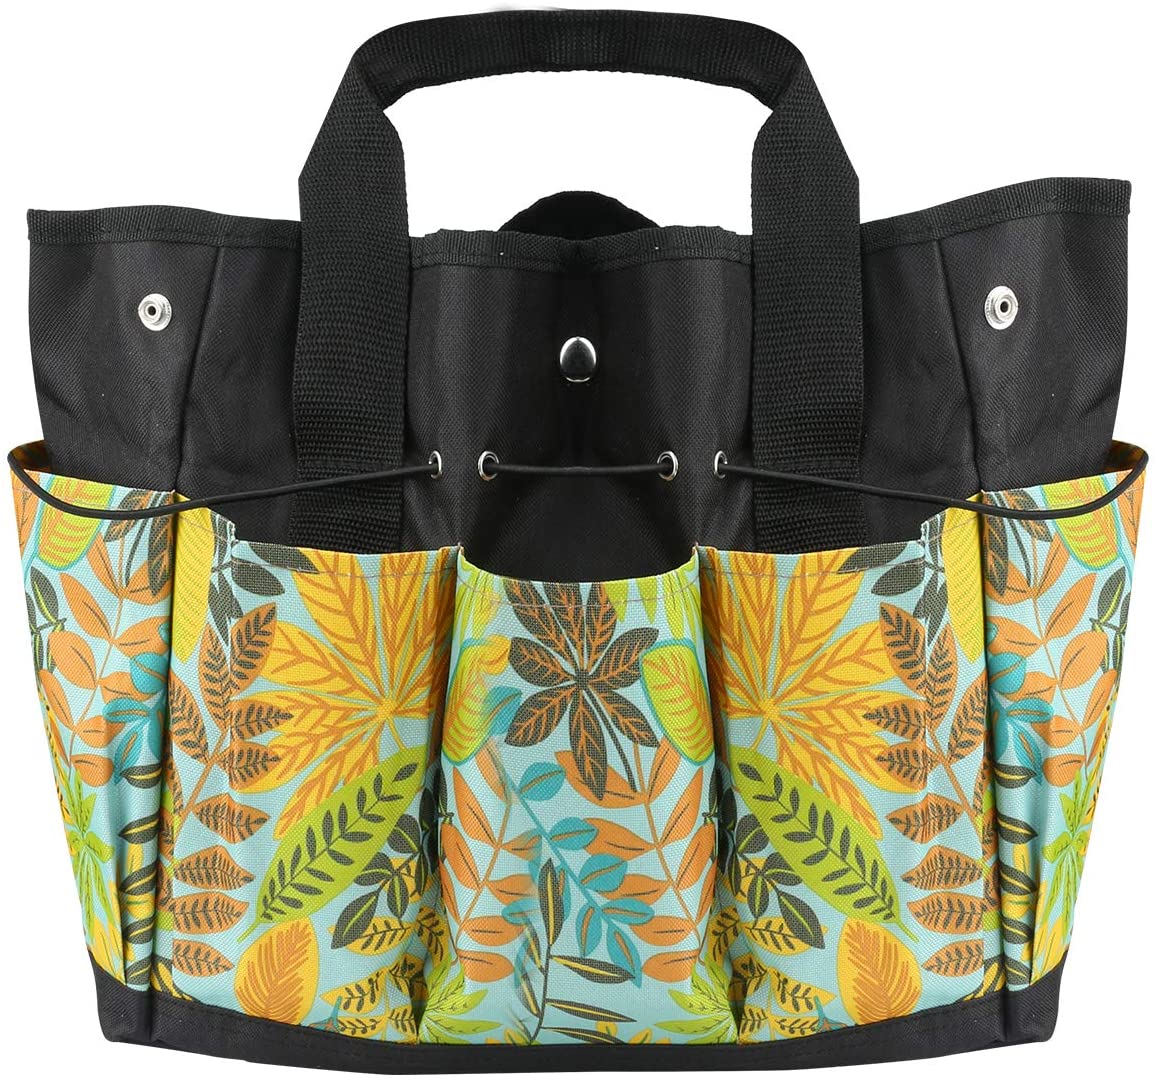 Mystery Garden Tool Tote Bag, Leaf Print Gardening Tool Tote Storage Bag with 8 Pockets, Heavy Duty Garden Tool Organizer Pouch Bag, Oxford Cloth Garden Bag for Women Men, Green (Tools Not Included)